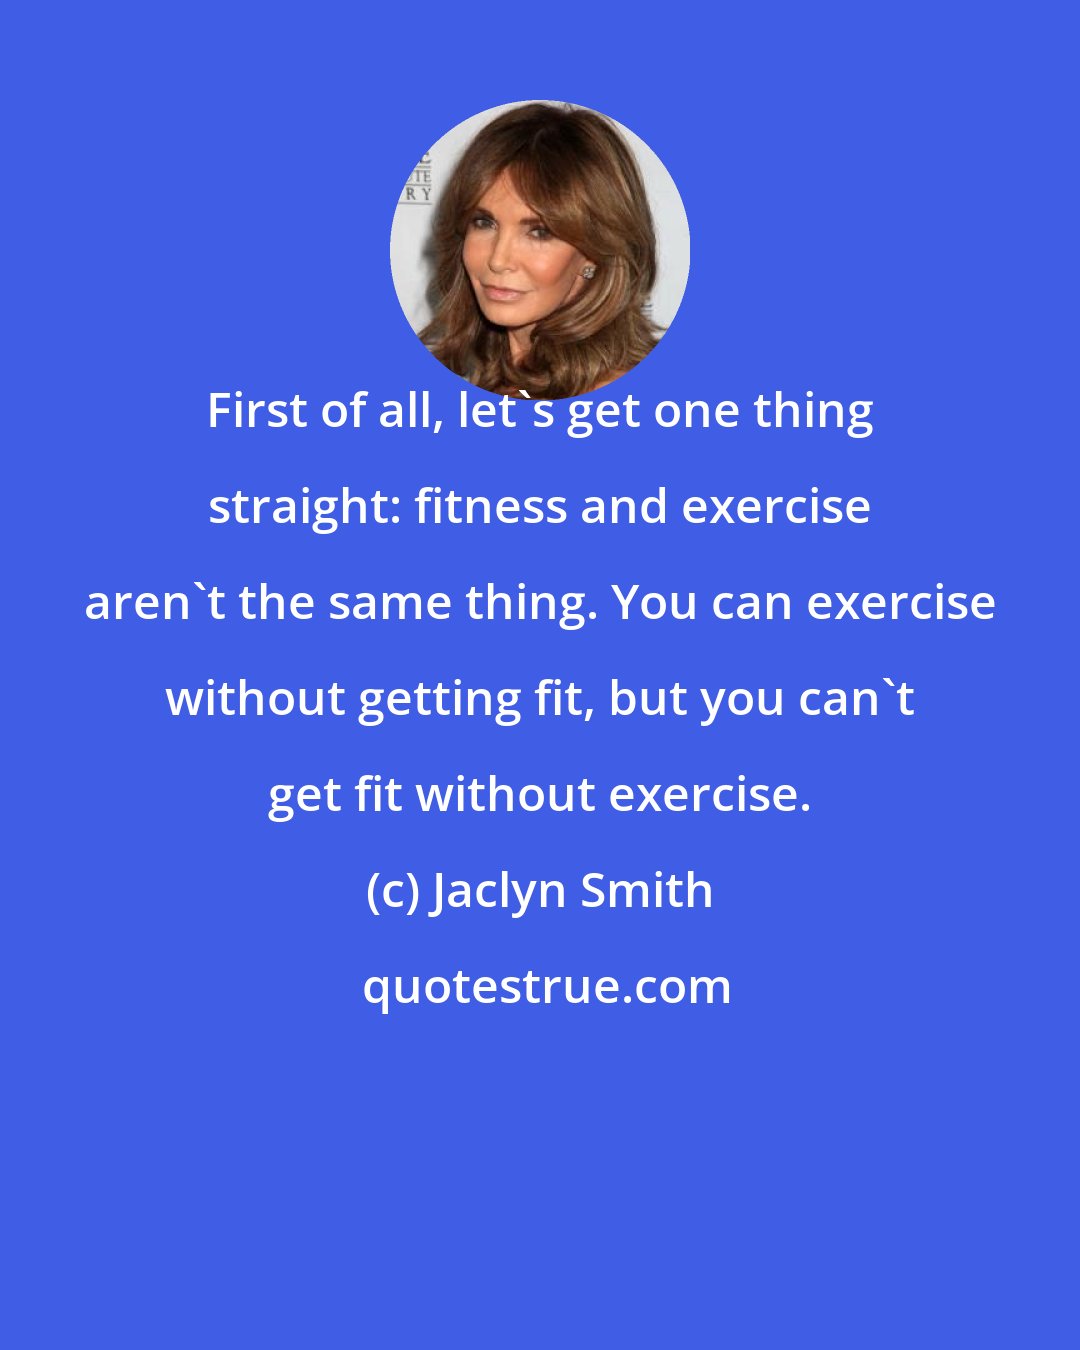 Jaclyn Smith: First of all, let's get one thing straight: fitness and exercise aren't the same thing. You can exercise without getting fit, but you can't get fit without exercise.